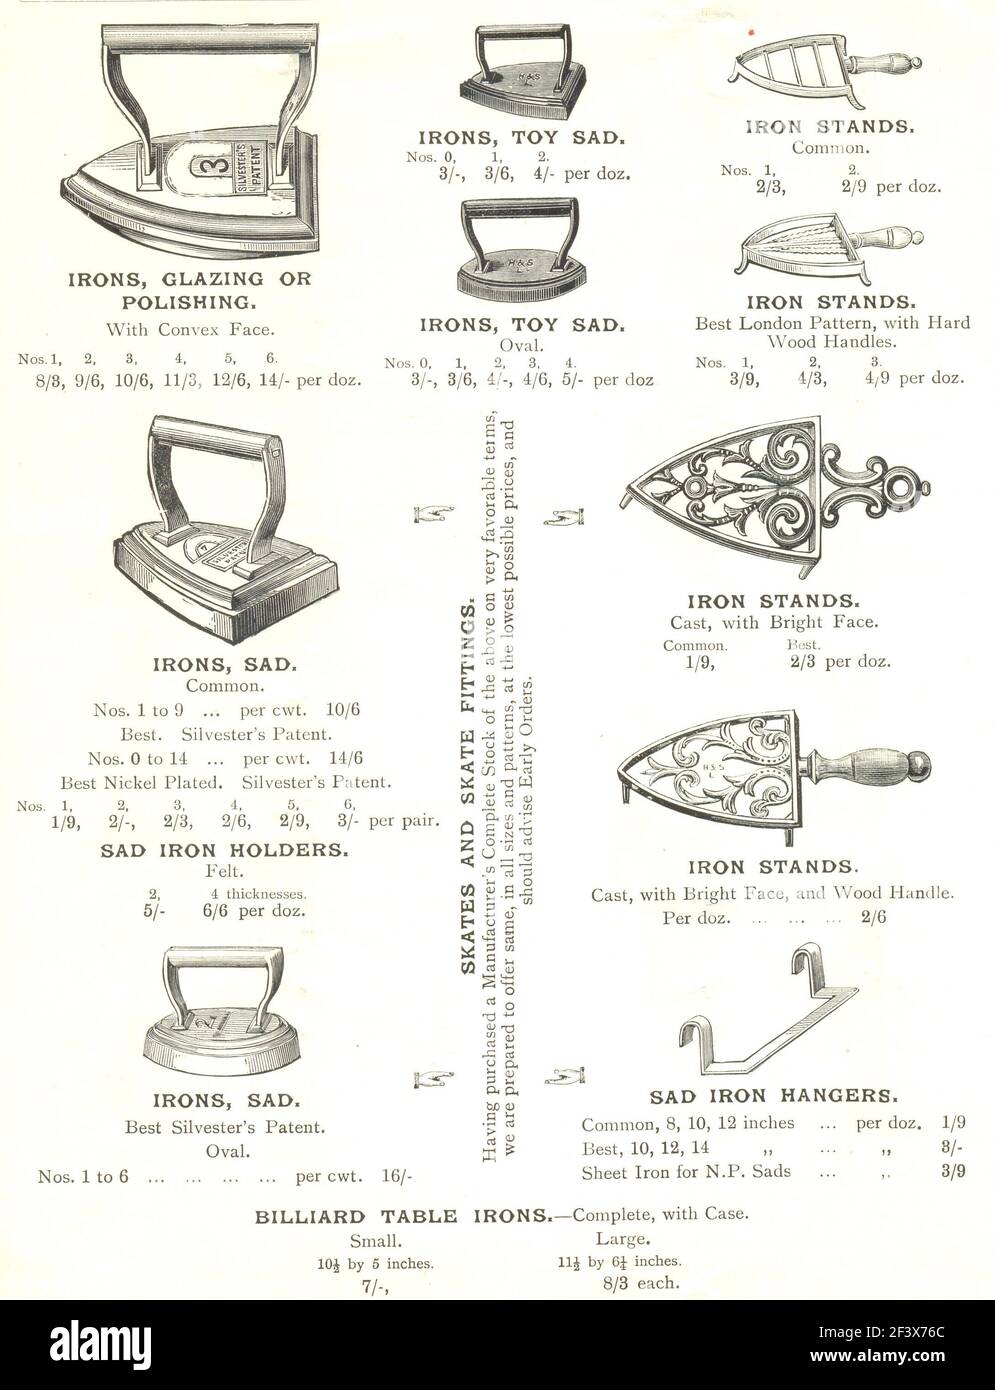 Page showing irons and iron stands from catalogue 'Competition Guide' for the Ironmongery and Hardware Trades published by G Harding & Sons, London S E 1892 Stock Photo